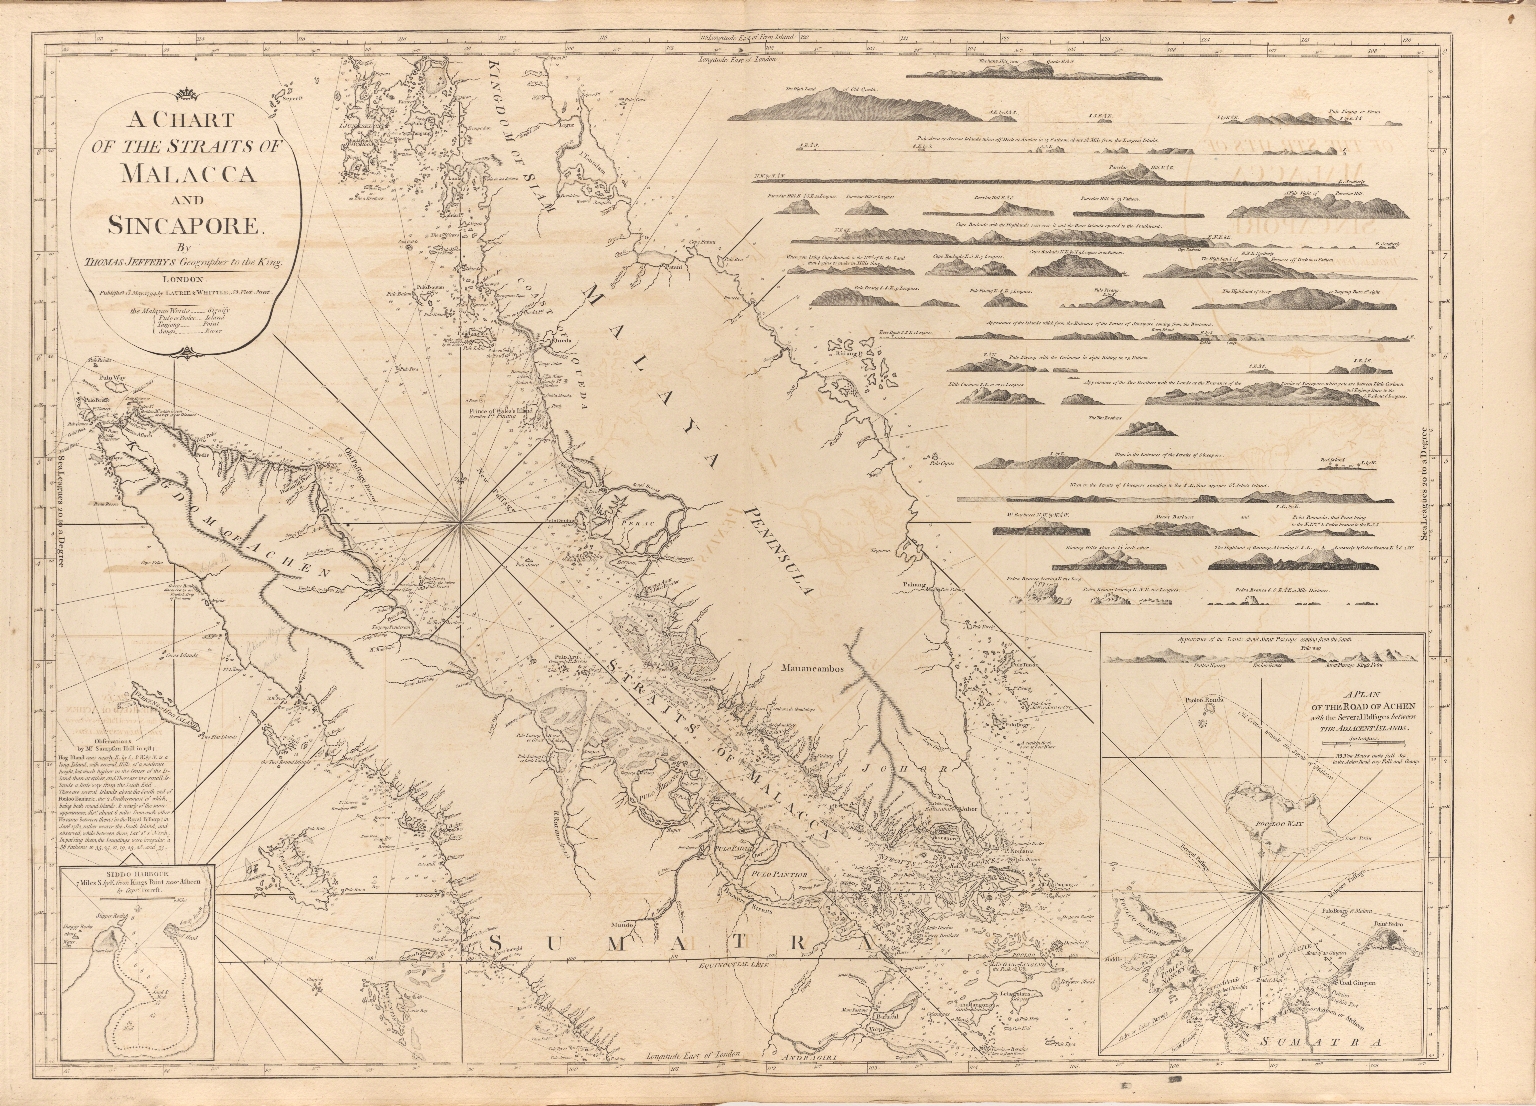 A chart of the Straits of Malacca and Sincapore